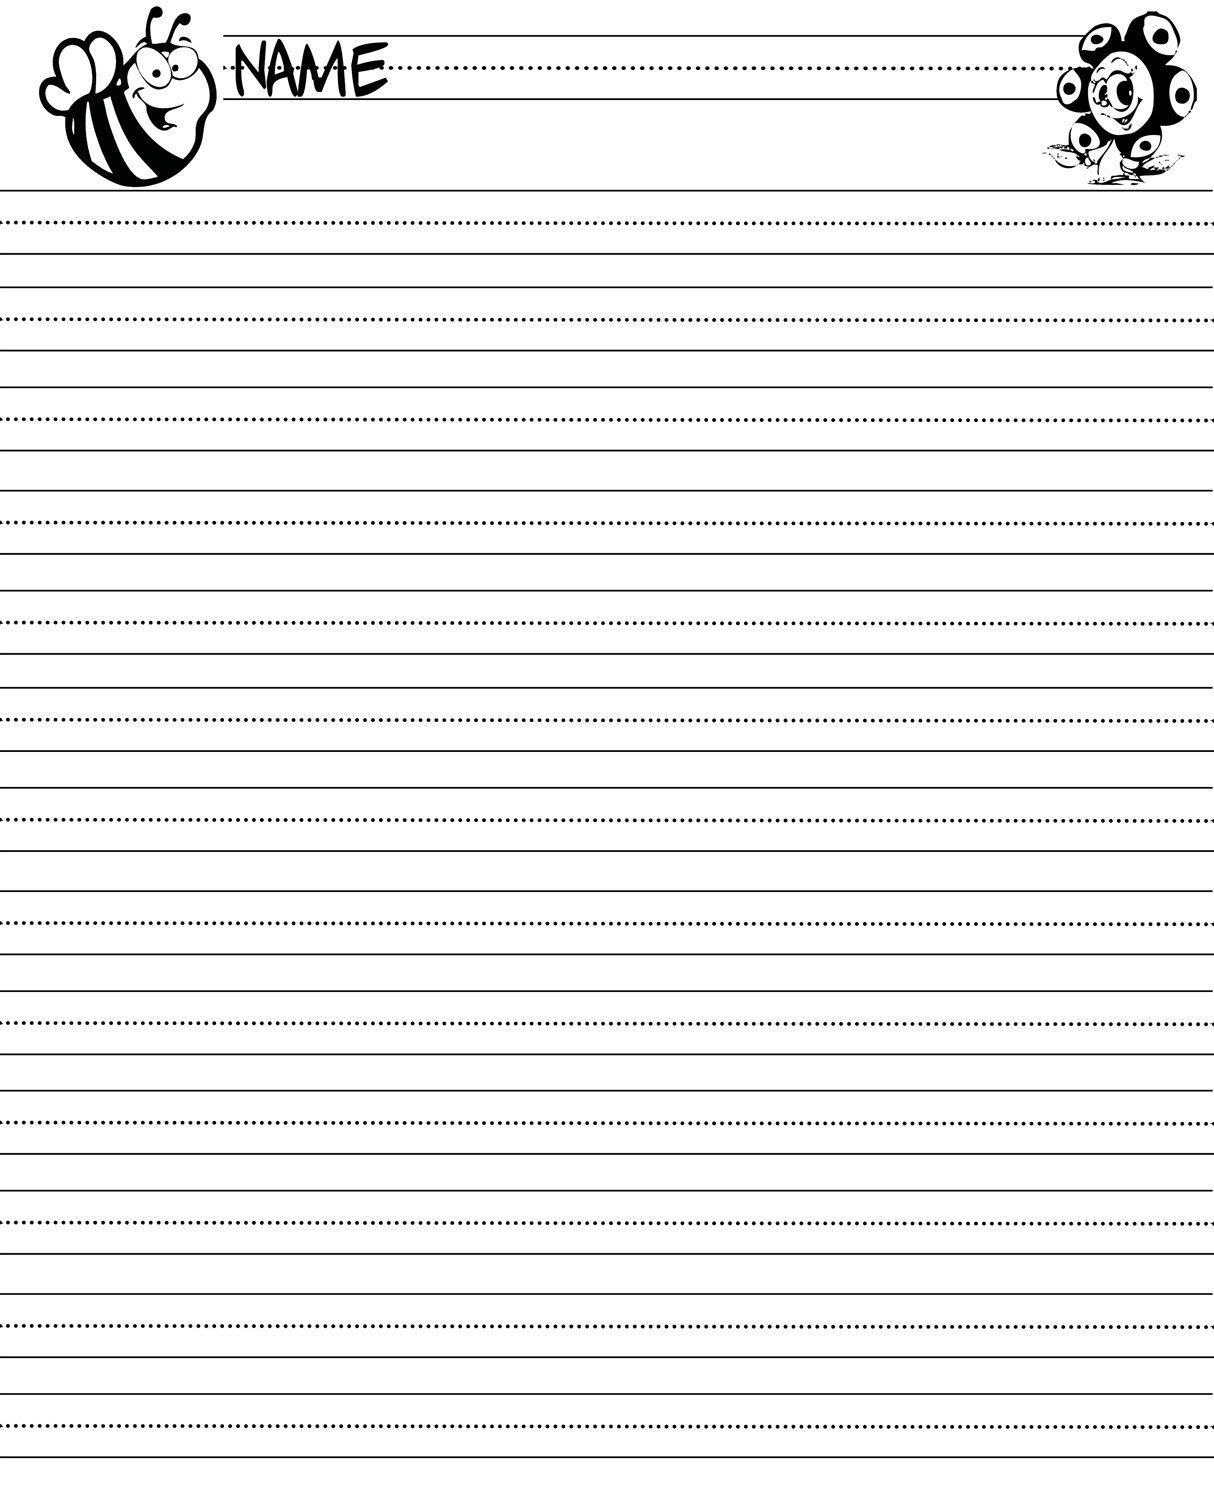 2nd-grade-writing-paper-writing-paper-template-for-2nd-grade-lomer